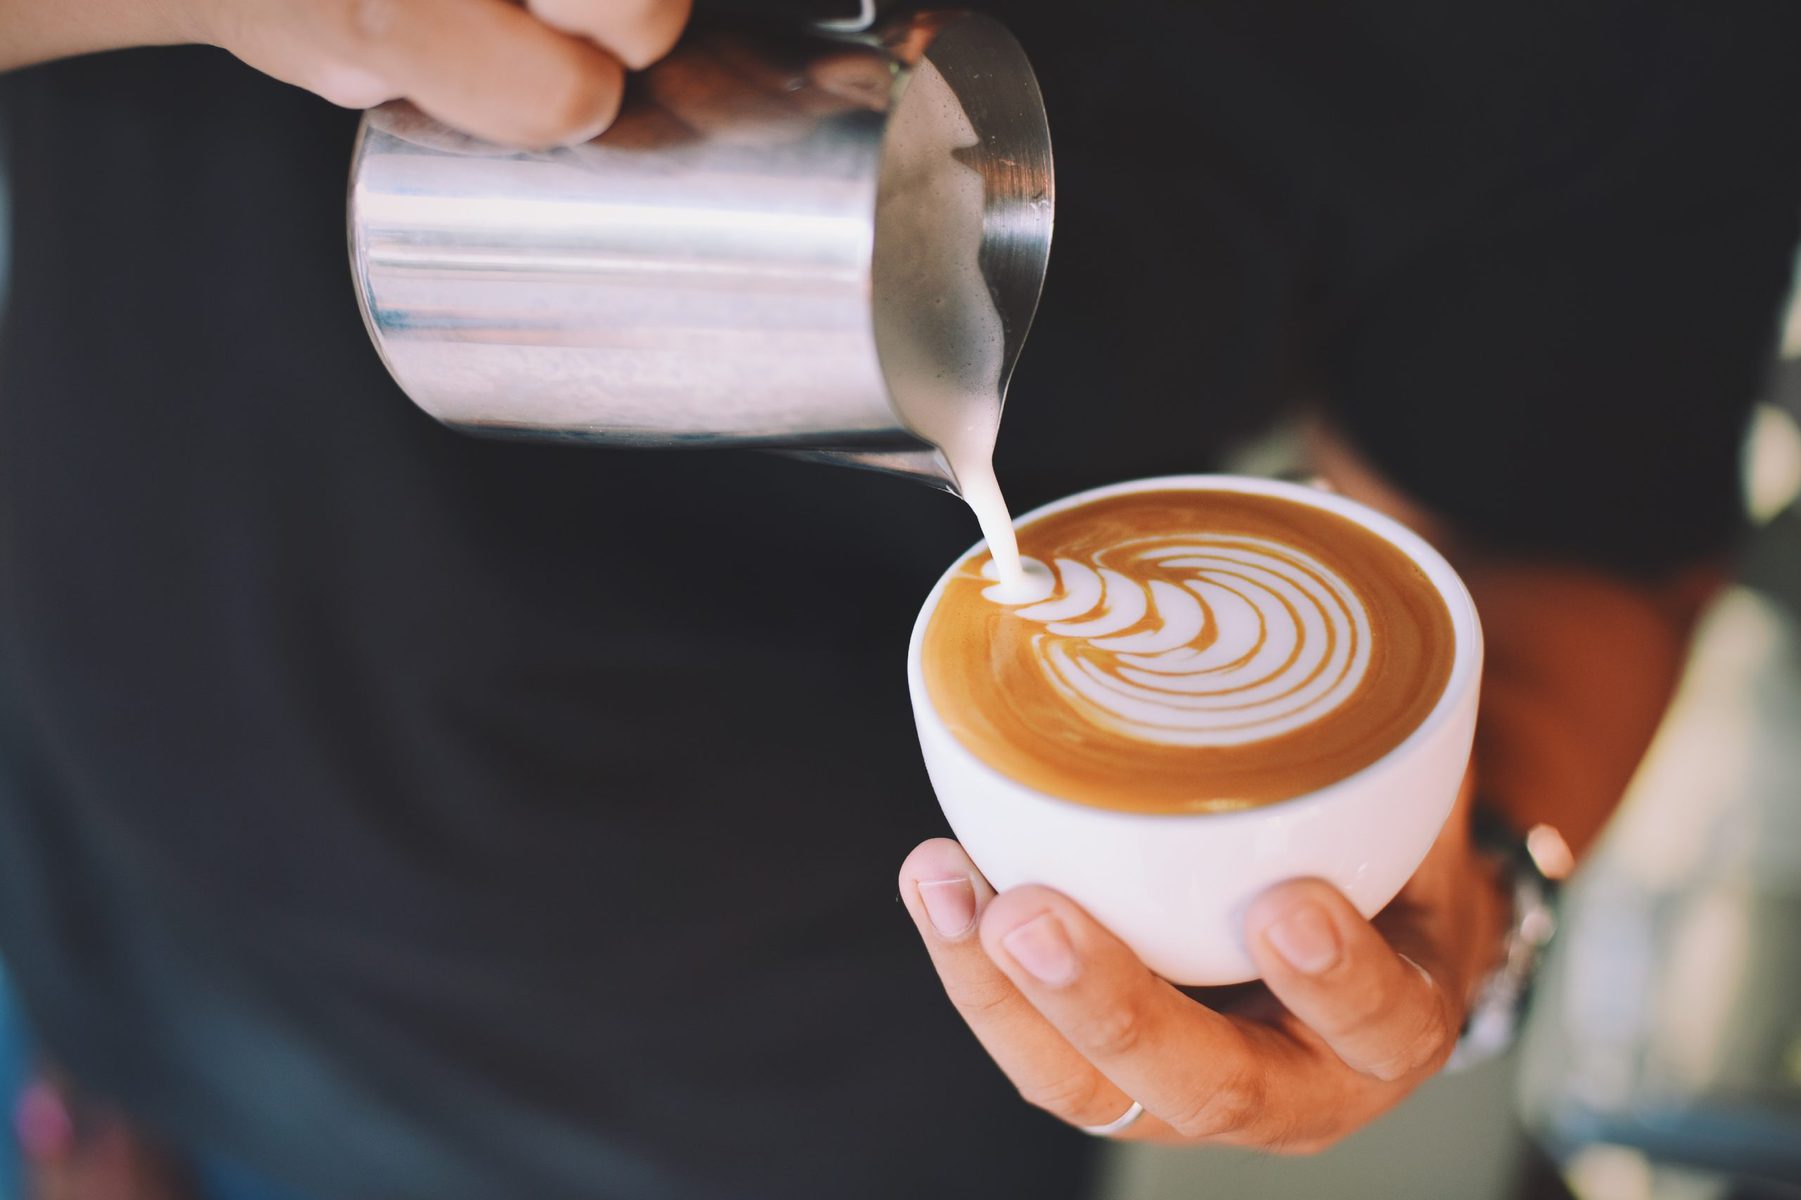 https://brewespressocoffee.com/wp-content/uploads/2022/02/Barista-Creating-Latte-Art-in-a-Latte-Cup-scaled.jpg